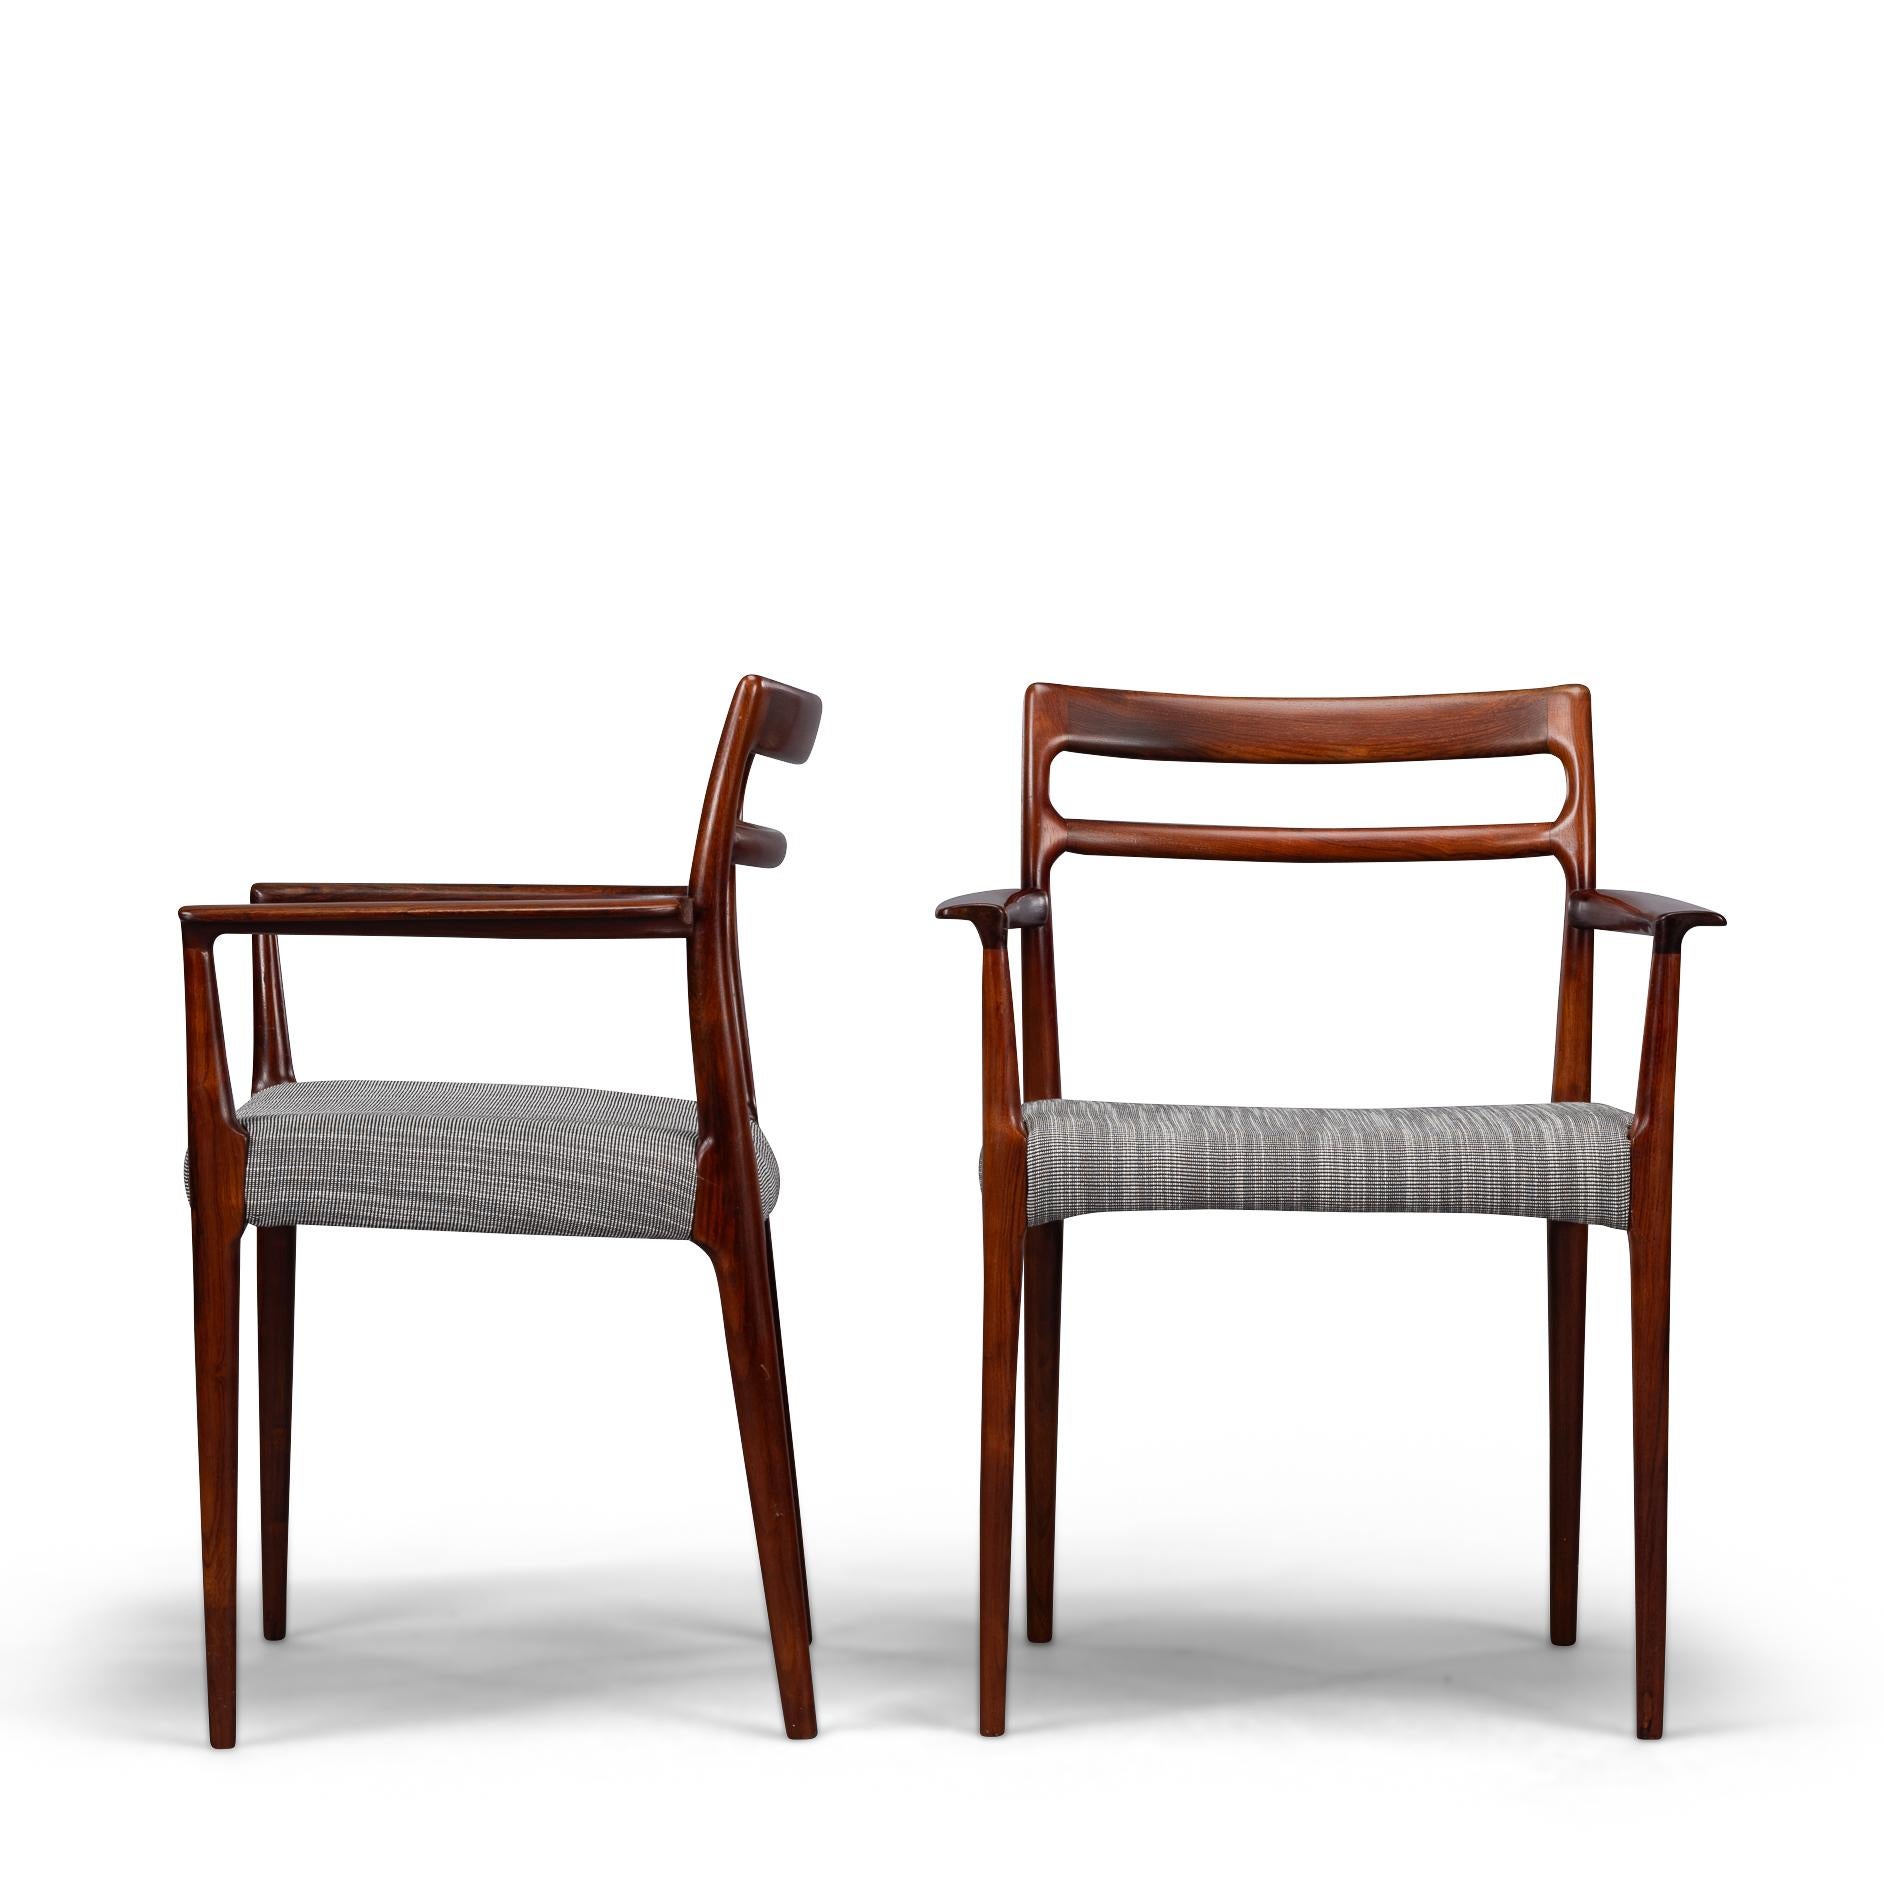 Mid-20th Century Danish Reupholstered Rosewood Armchairs by Erling Torvits for Soro, Set of 2 For Sale